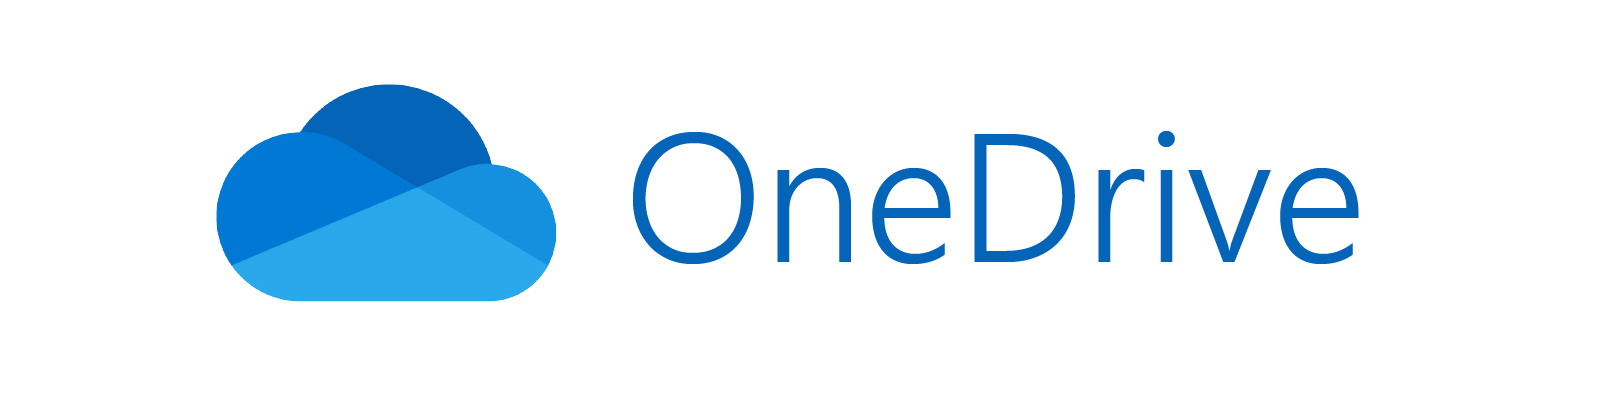 OneDrive, Computing and Information Technology Services (CITS)